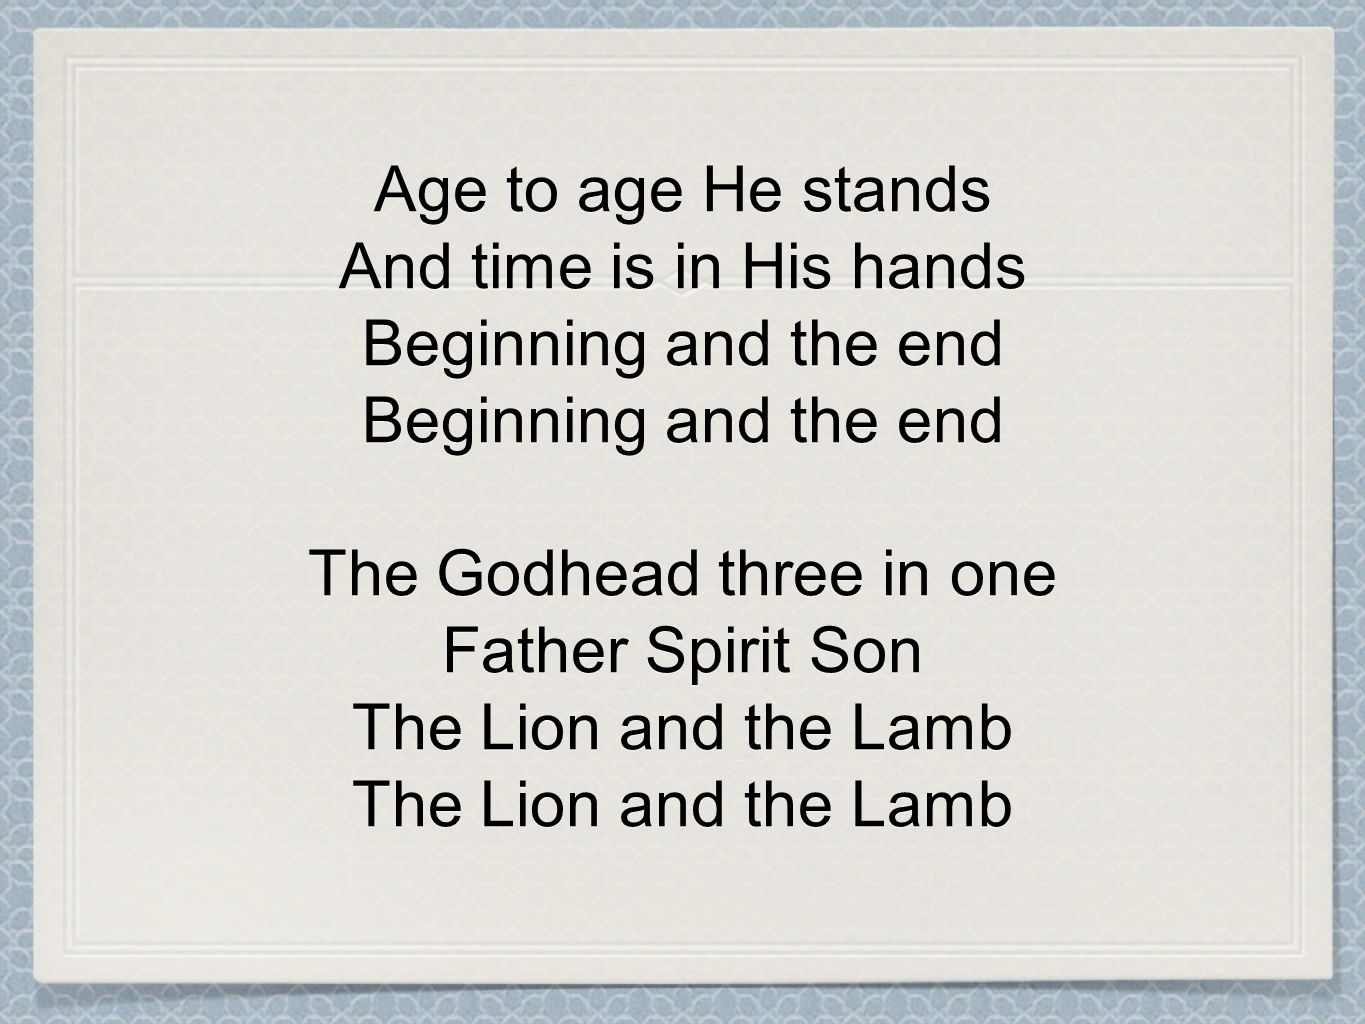 Age to age He stands And time is in His hands Beginning and the end Beginning and the end The Godhead three in one Father Spirit Son The Lion and the Lamb The Lion and the Lamb